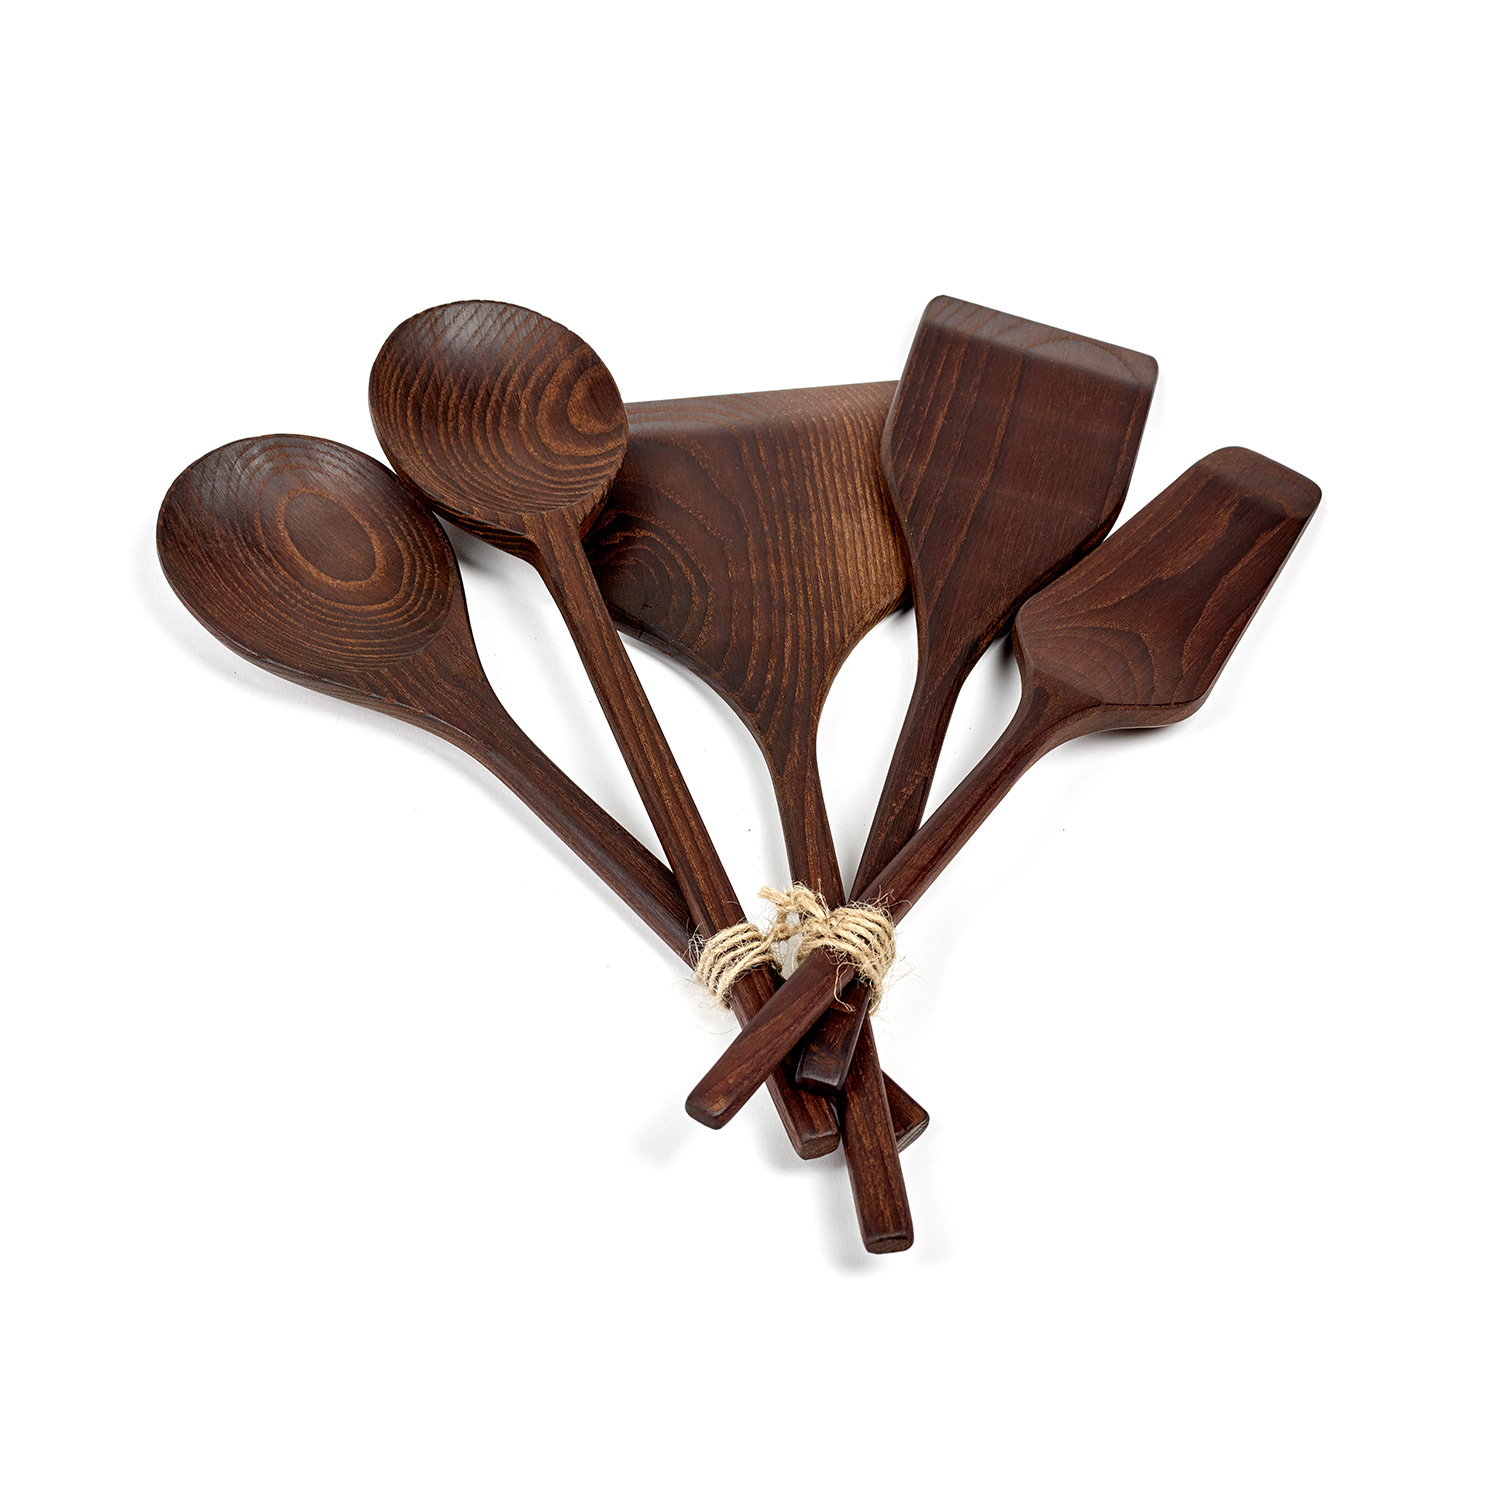 Pascale Naessens for Serax Pure - Set of 5 Wooden Kitchen Tools